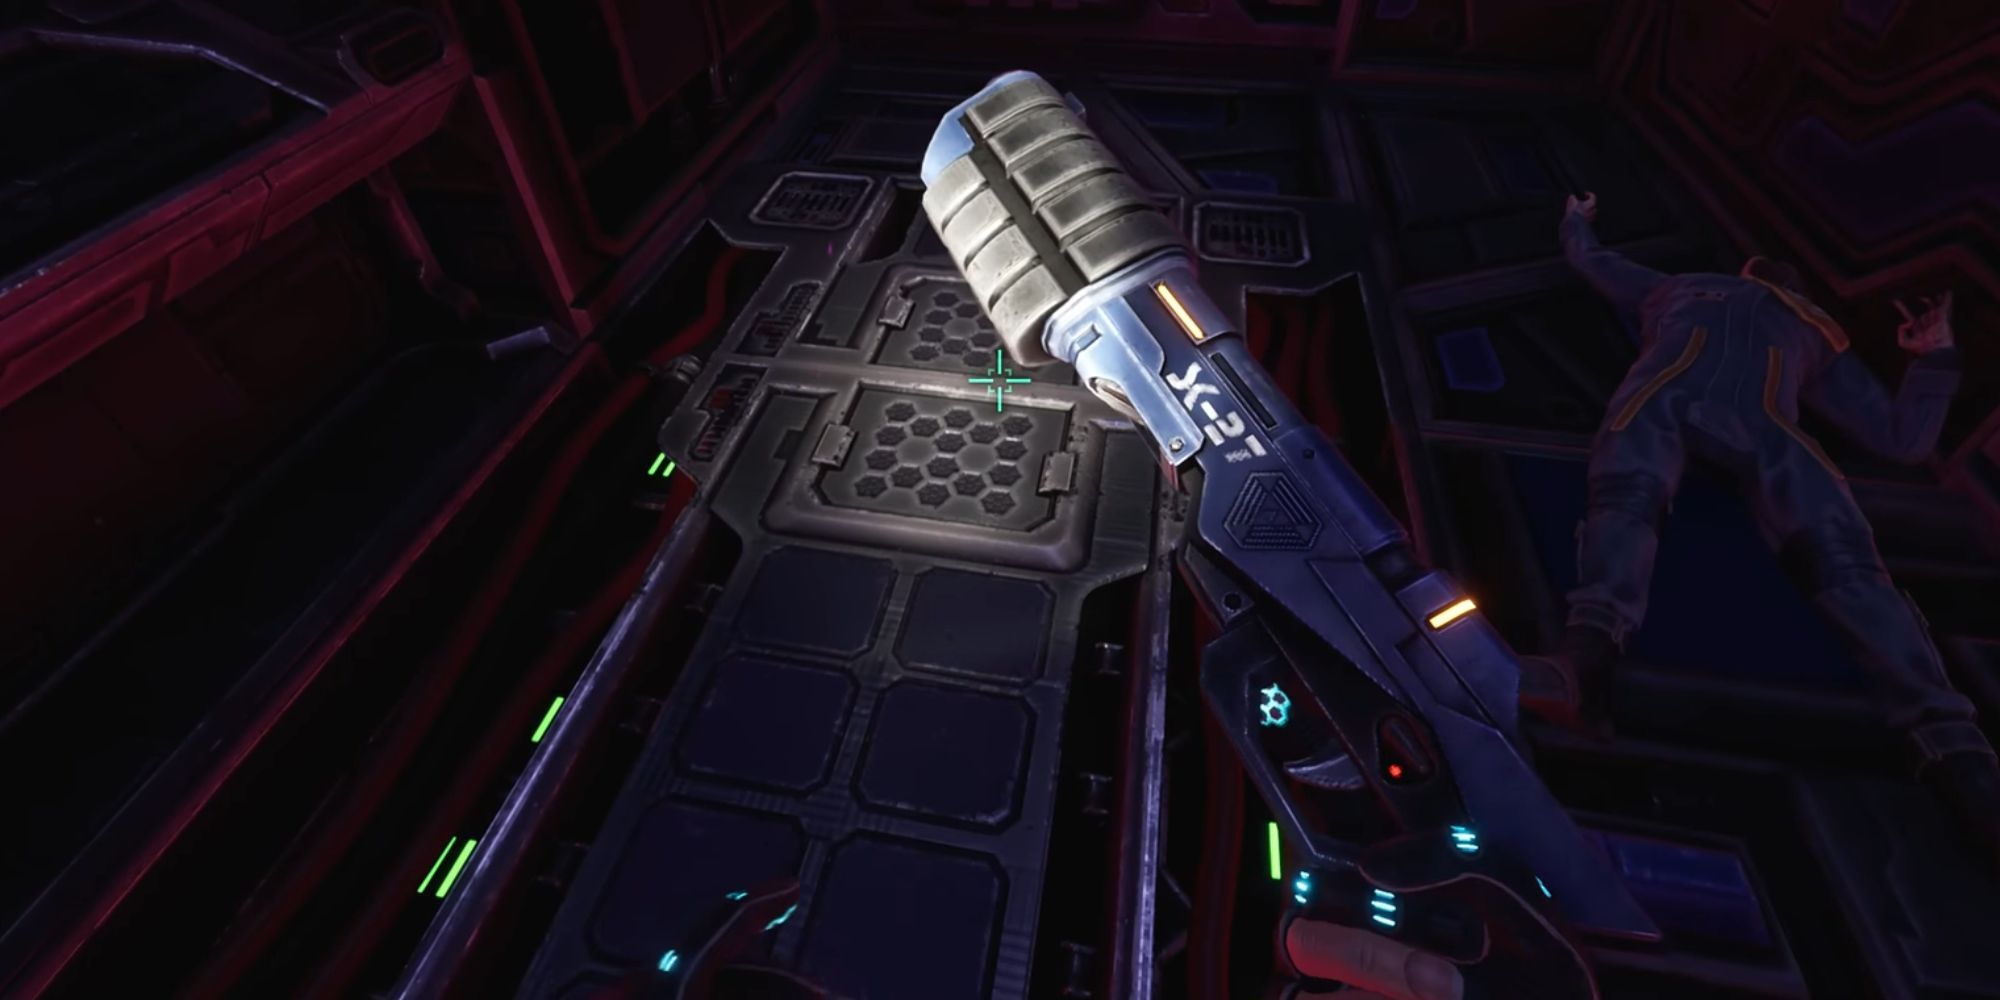 System Shock's SK-27 rifle.